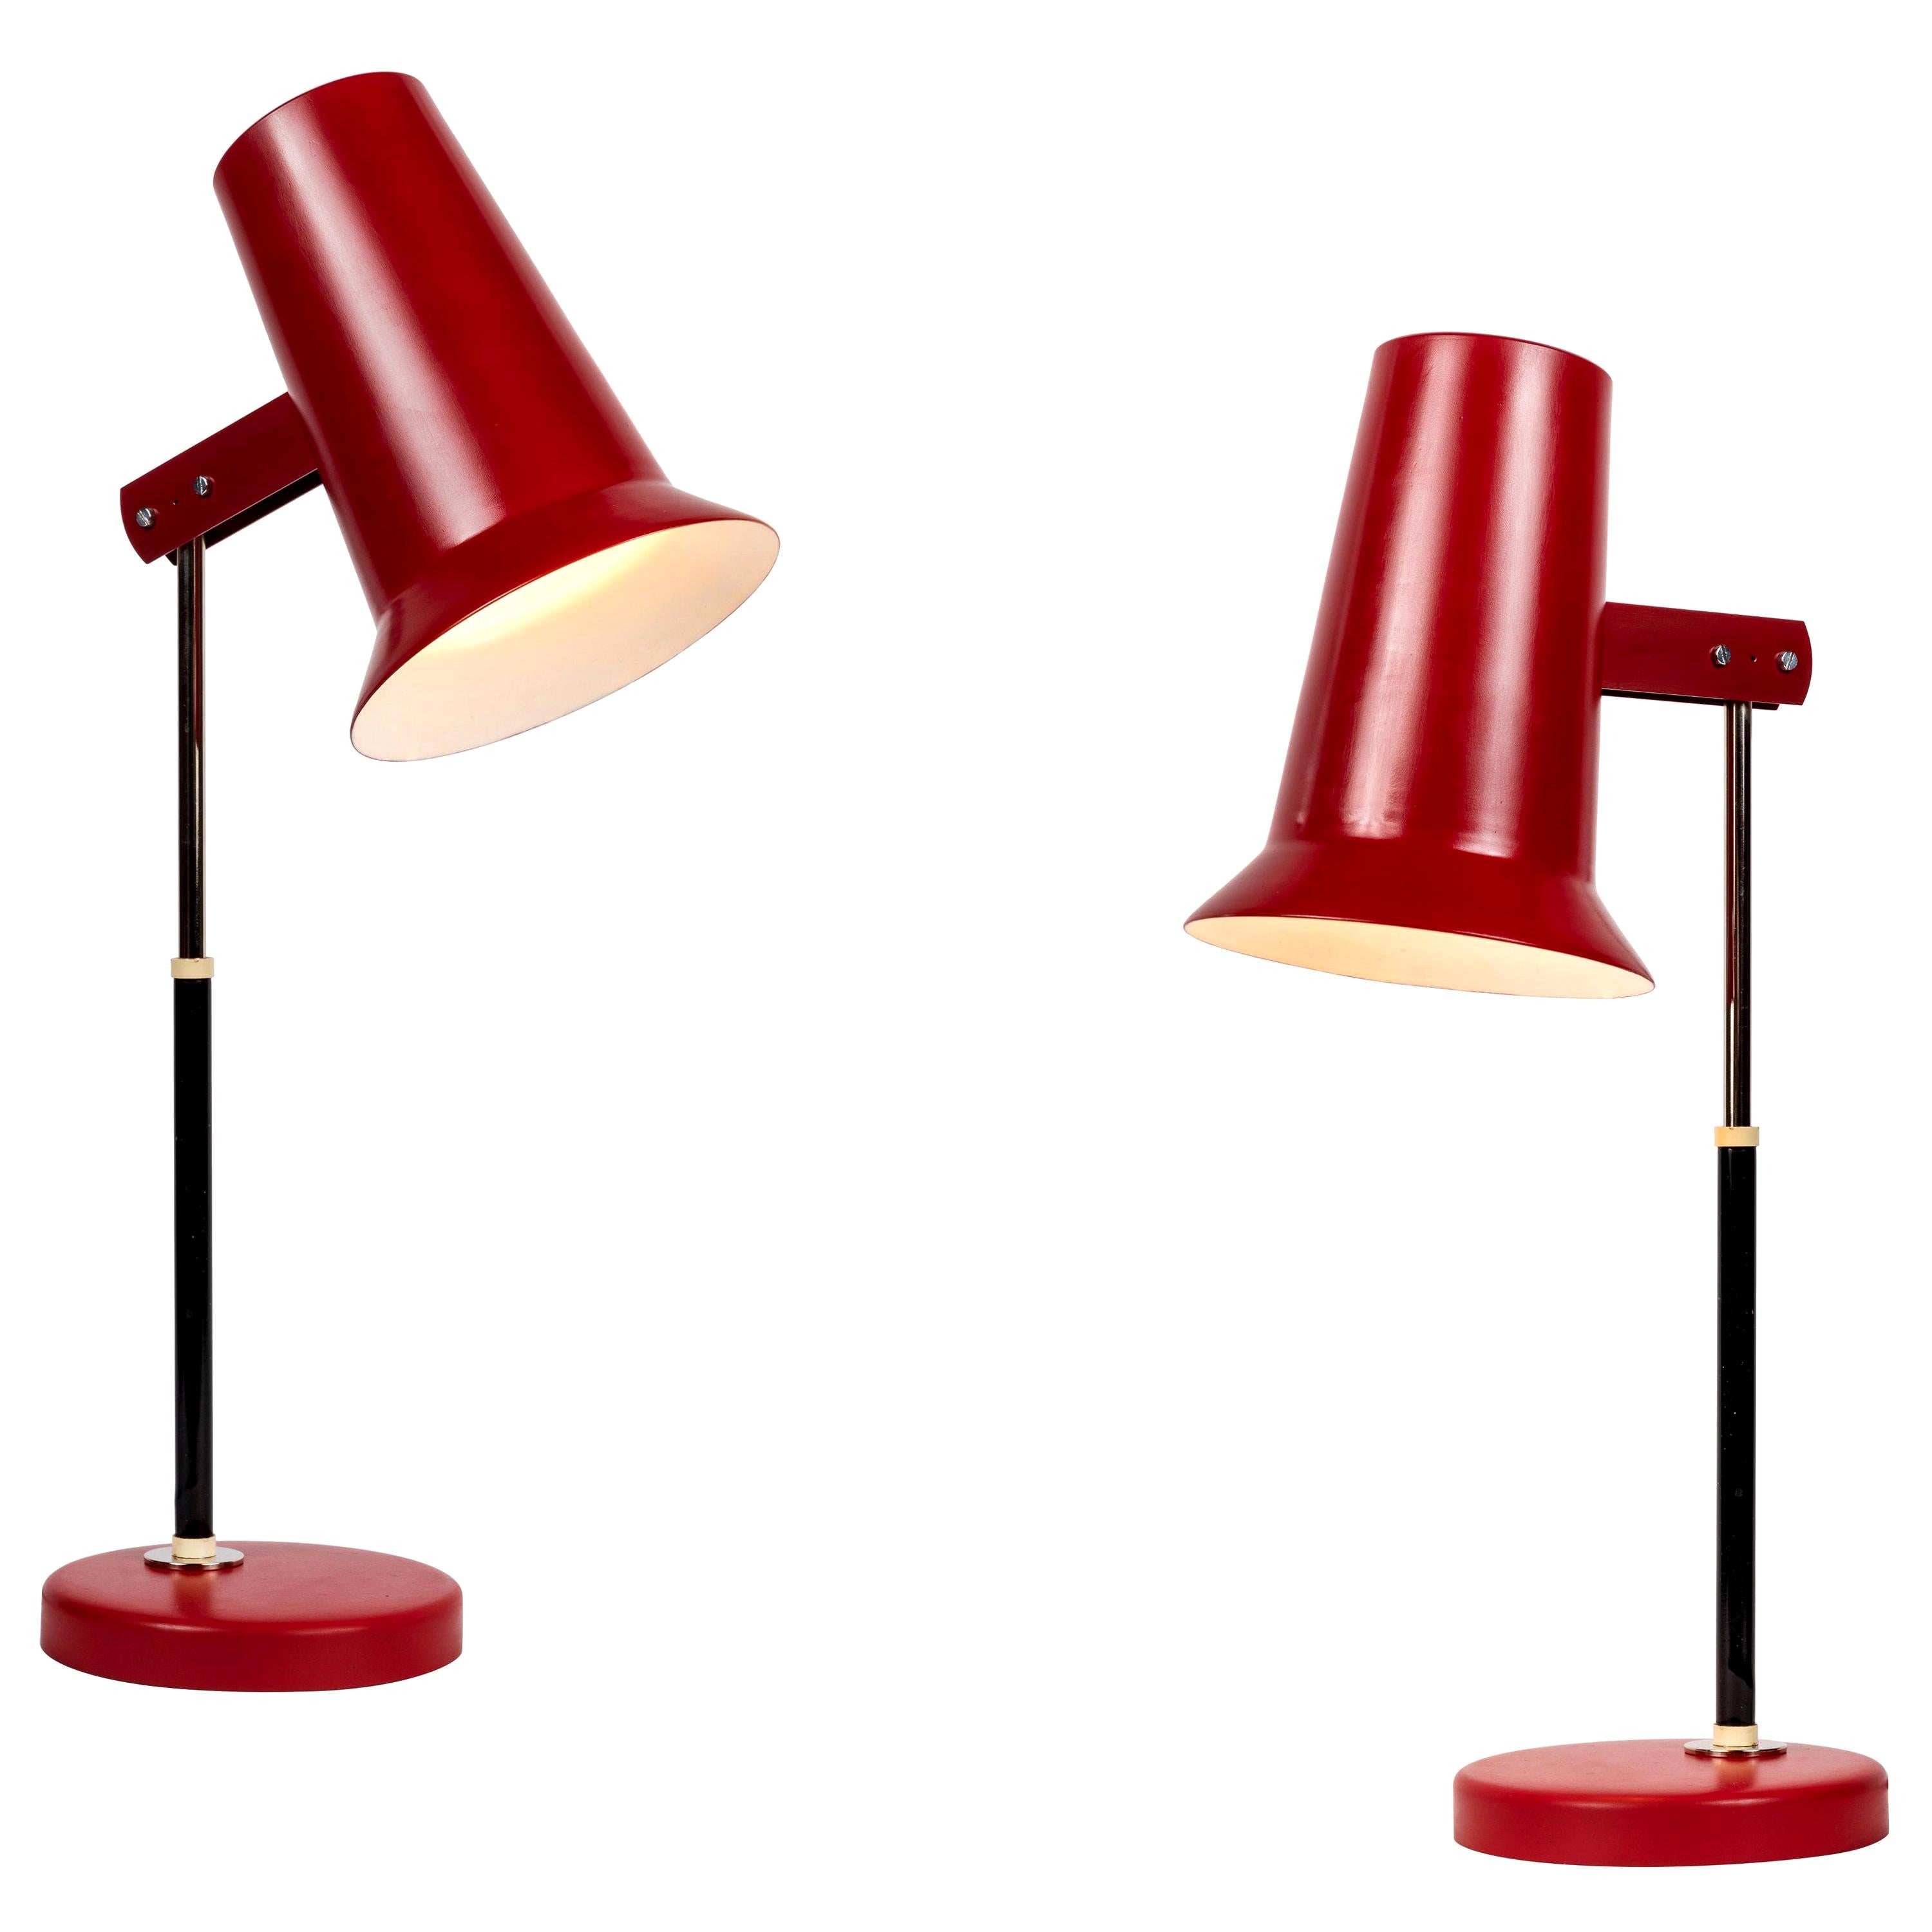 Pair of 1960s Yki Nummi Series 40-040 Red Table Lamps for Stockman Orno